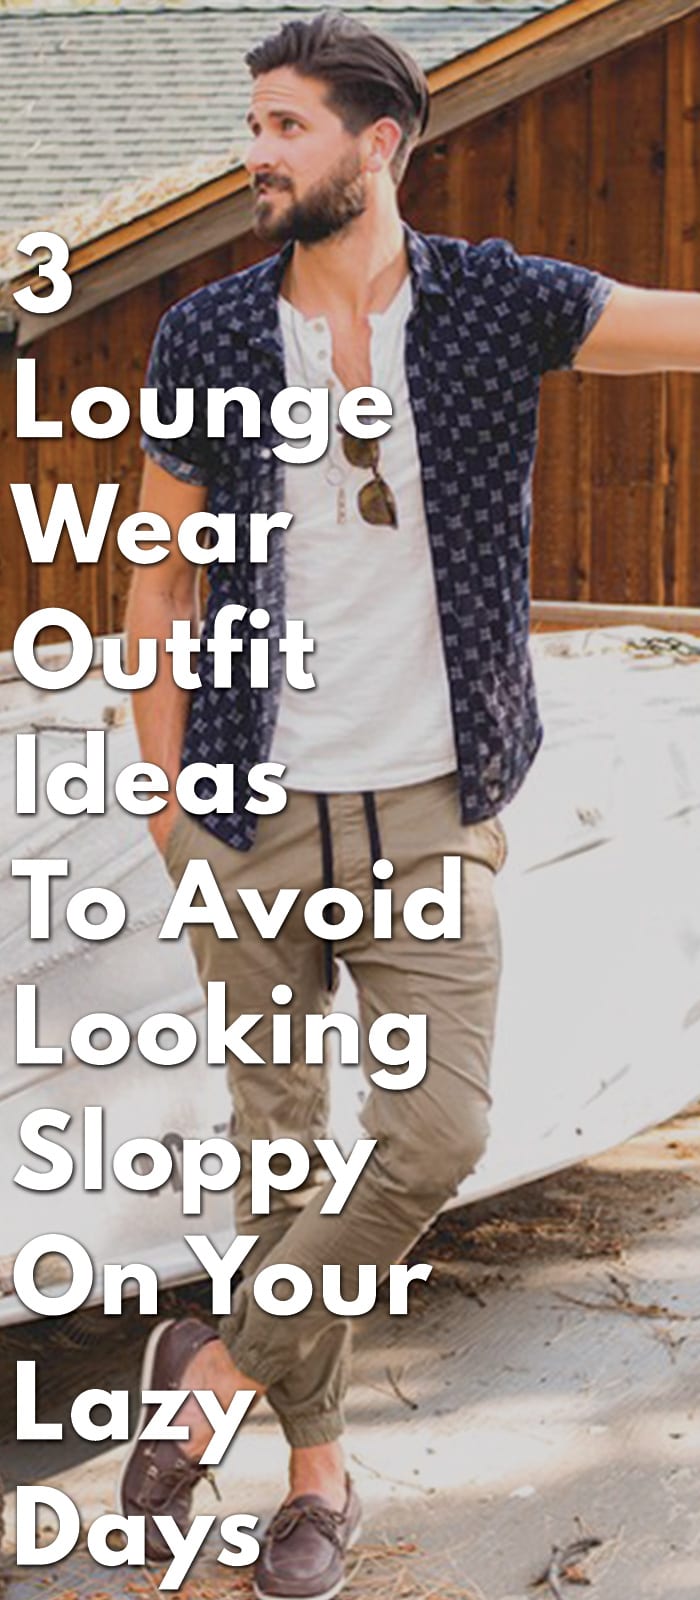 3-Lounge-Wear-Outfit-Ideas-To-Avoid-Looking-Sloppy-On-Your-Lazy-Days